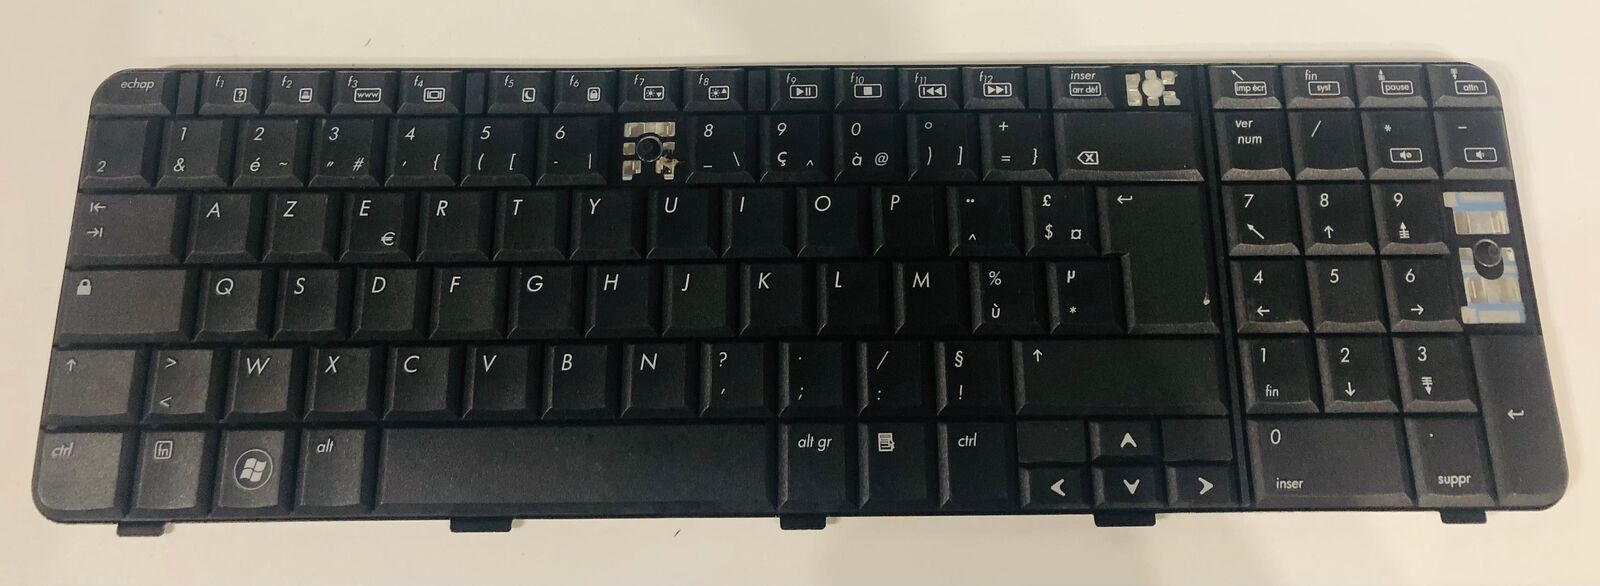 532809-051 keyboard - HP G71 - for parts